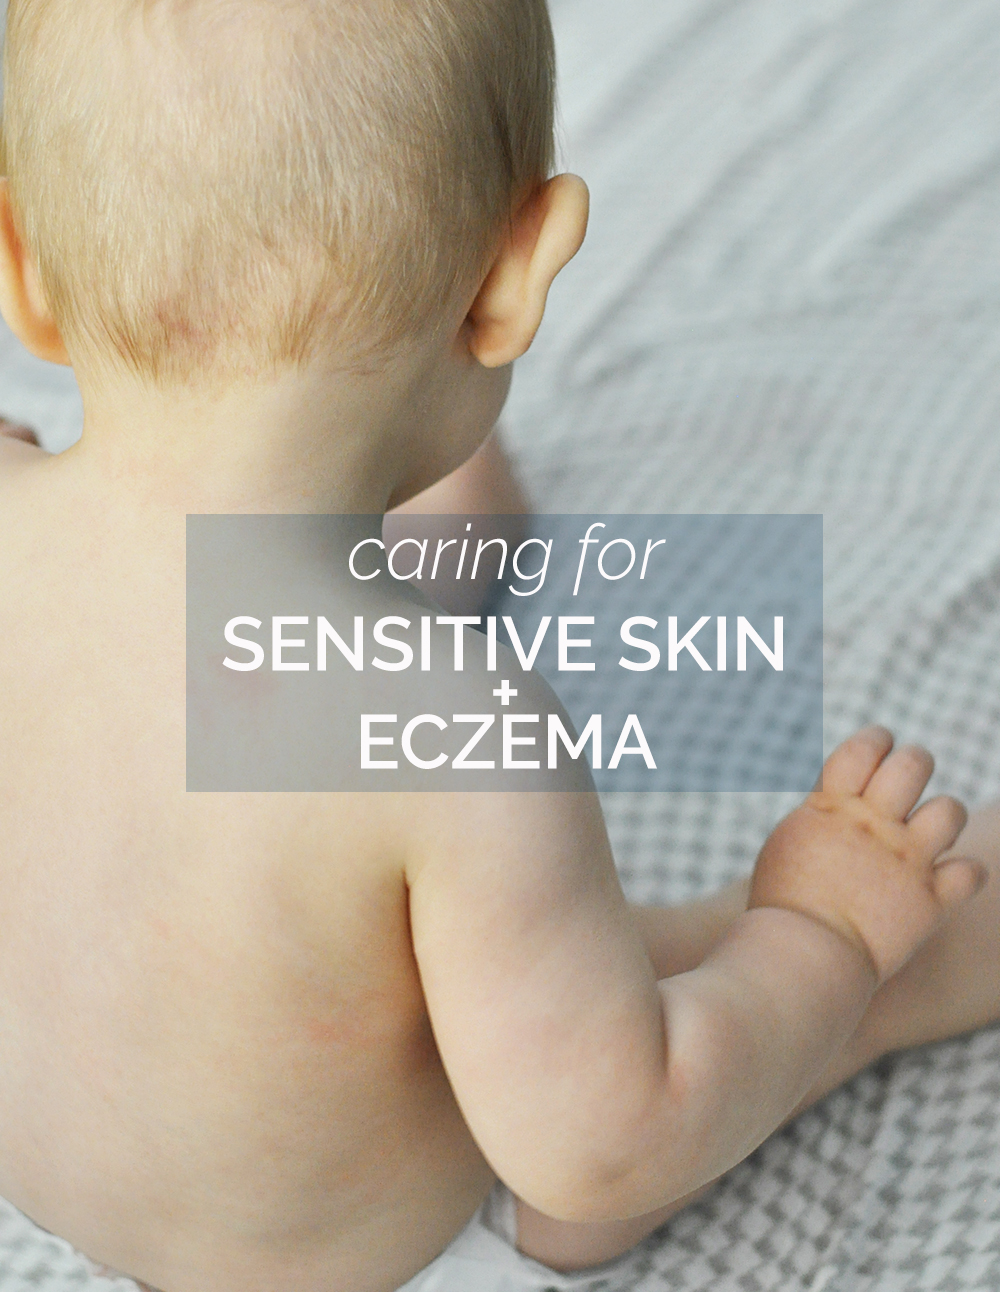 How We Care For Sensitive Skin and Eczema